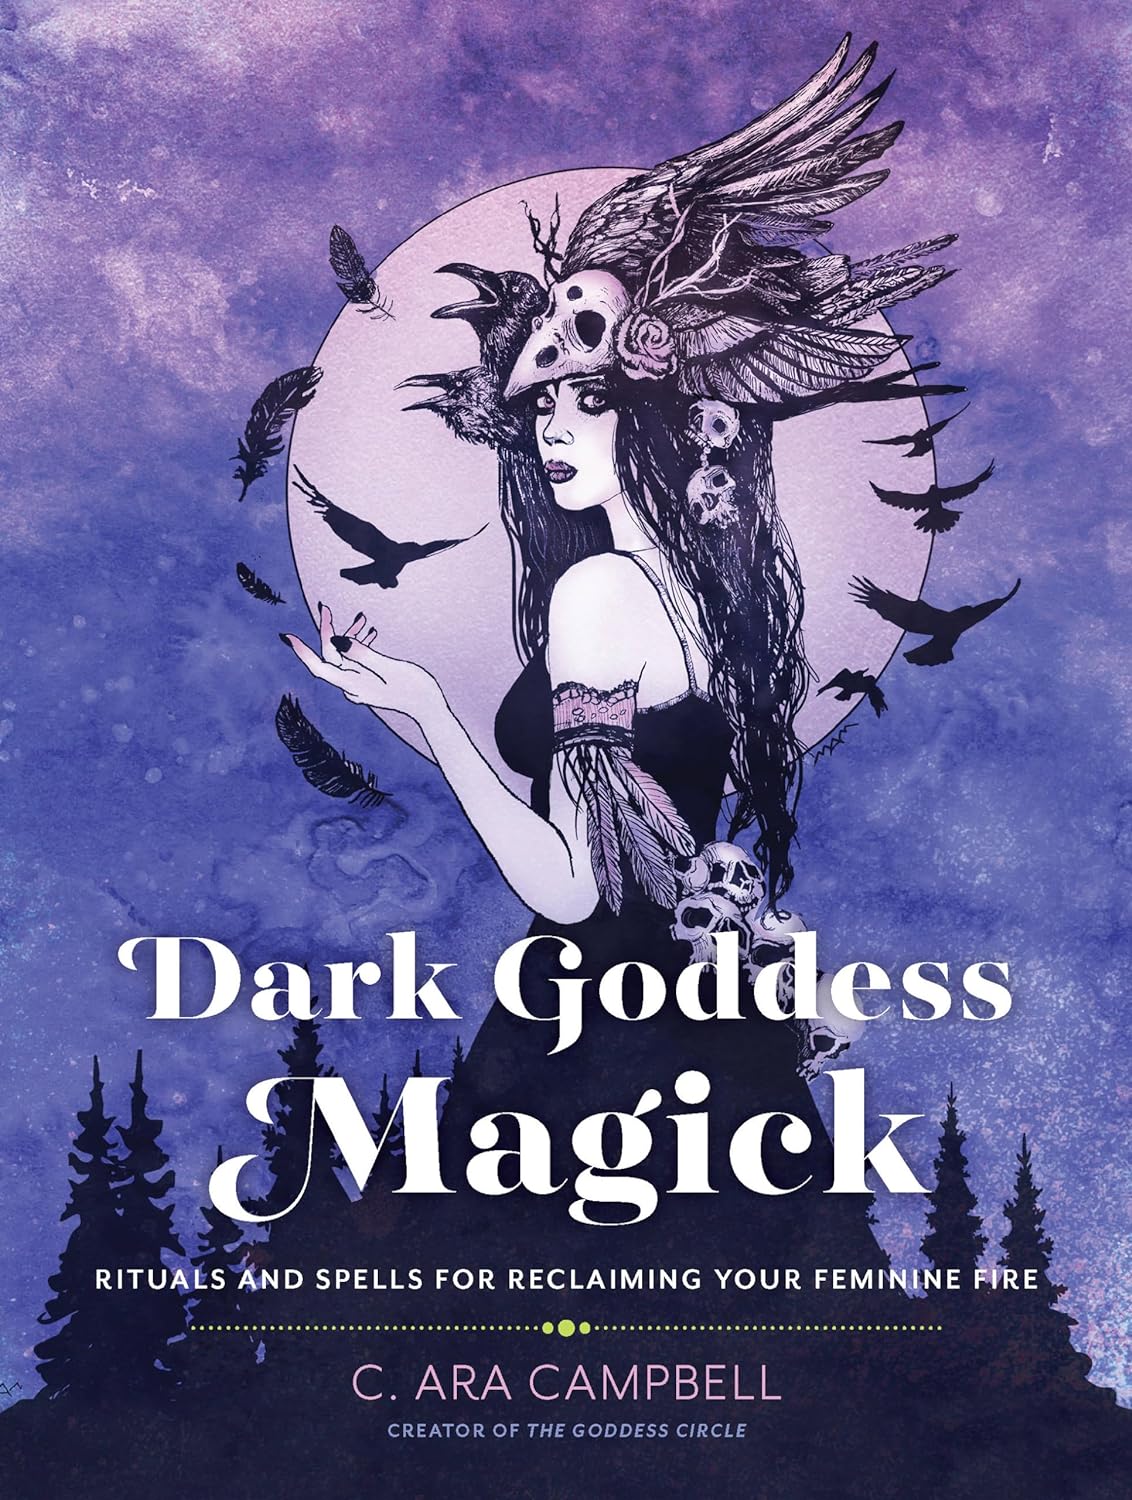 Snag Your Discount on Dark Goddess Magick: Rituals and Spells for Reclaiming Your Feminine Fire